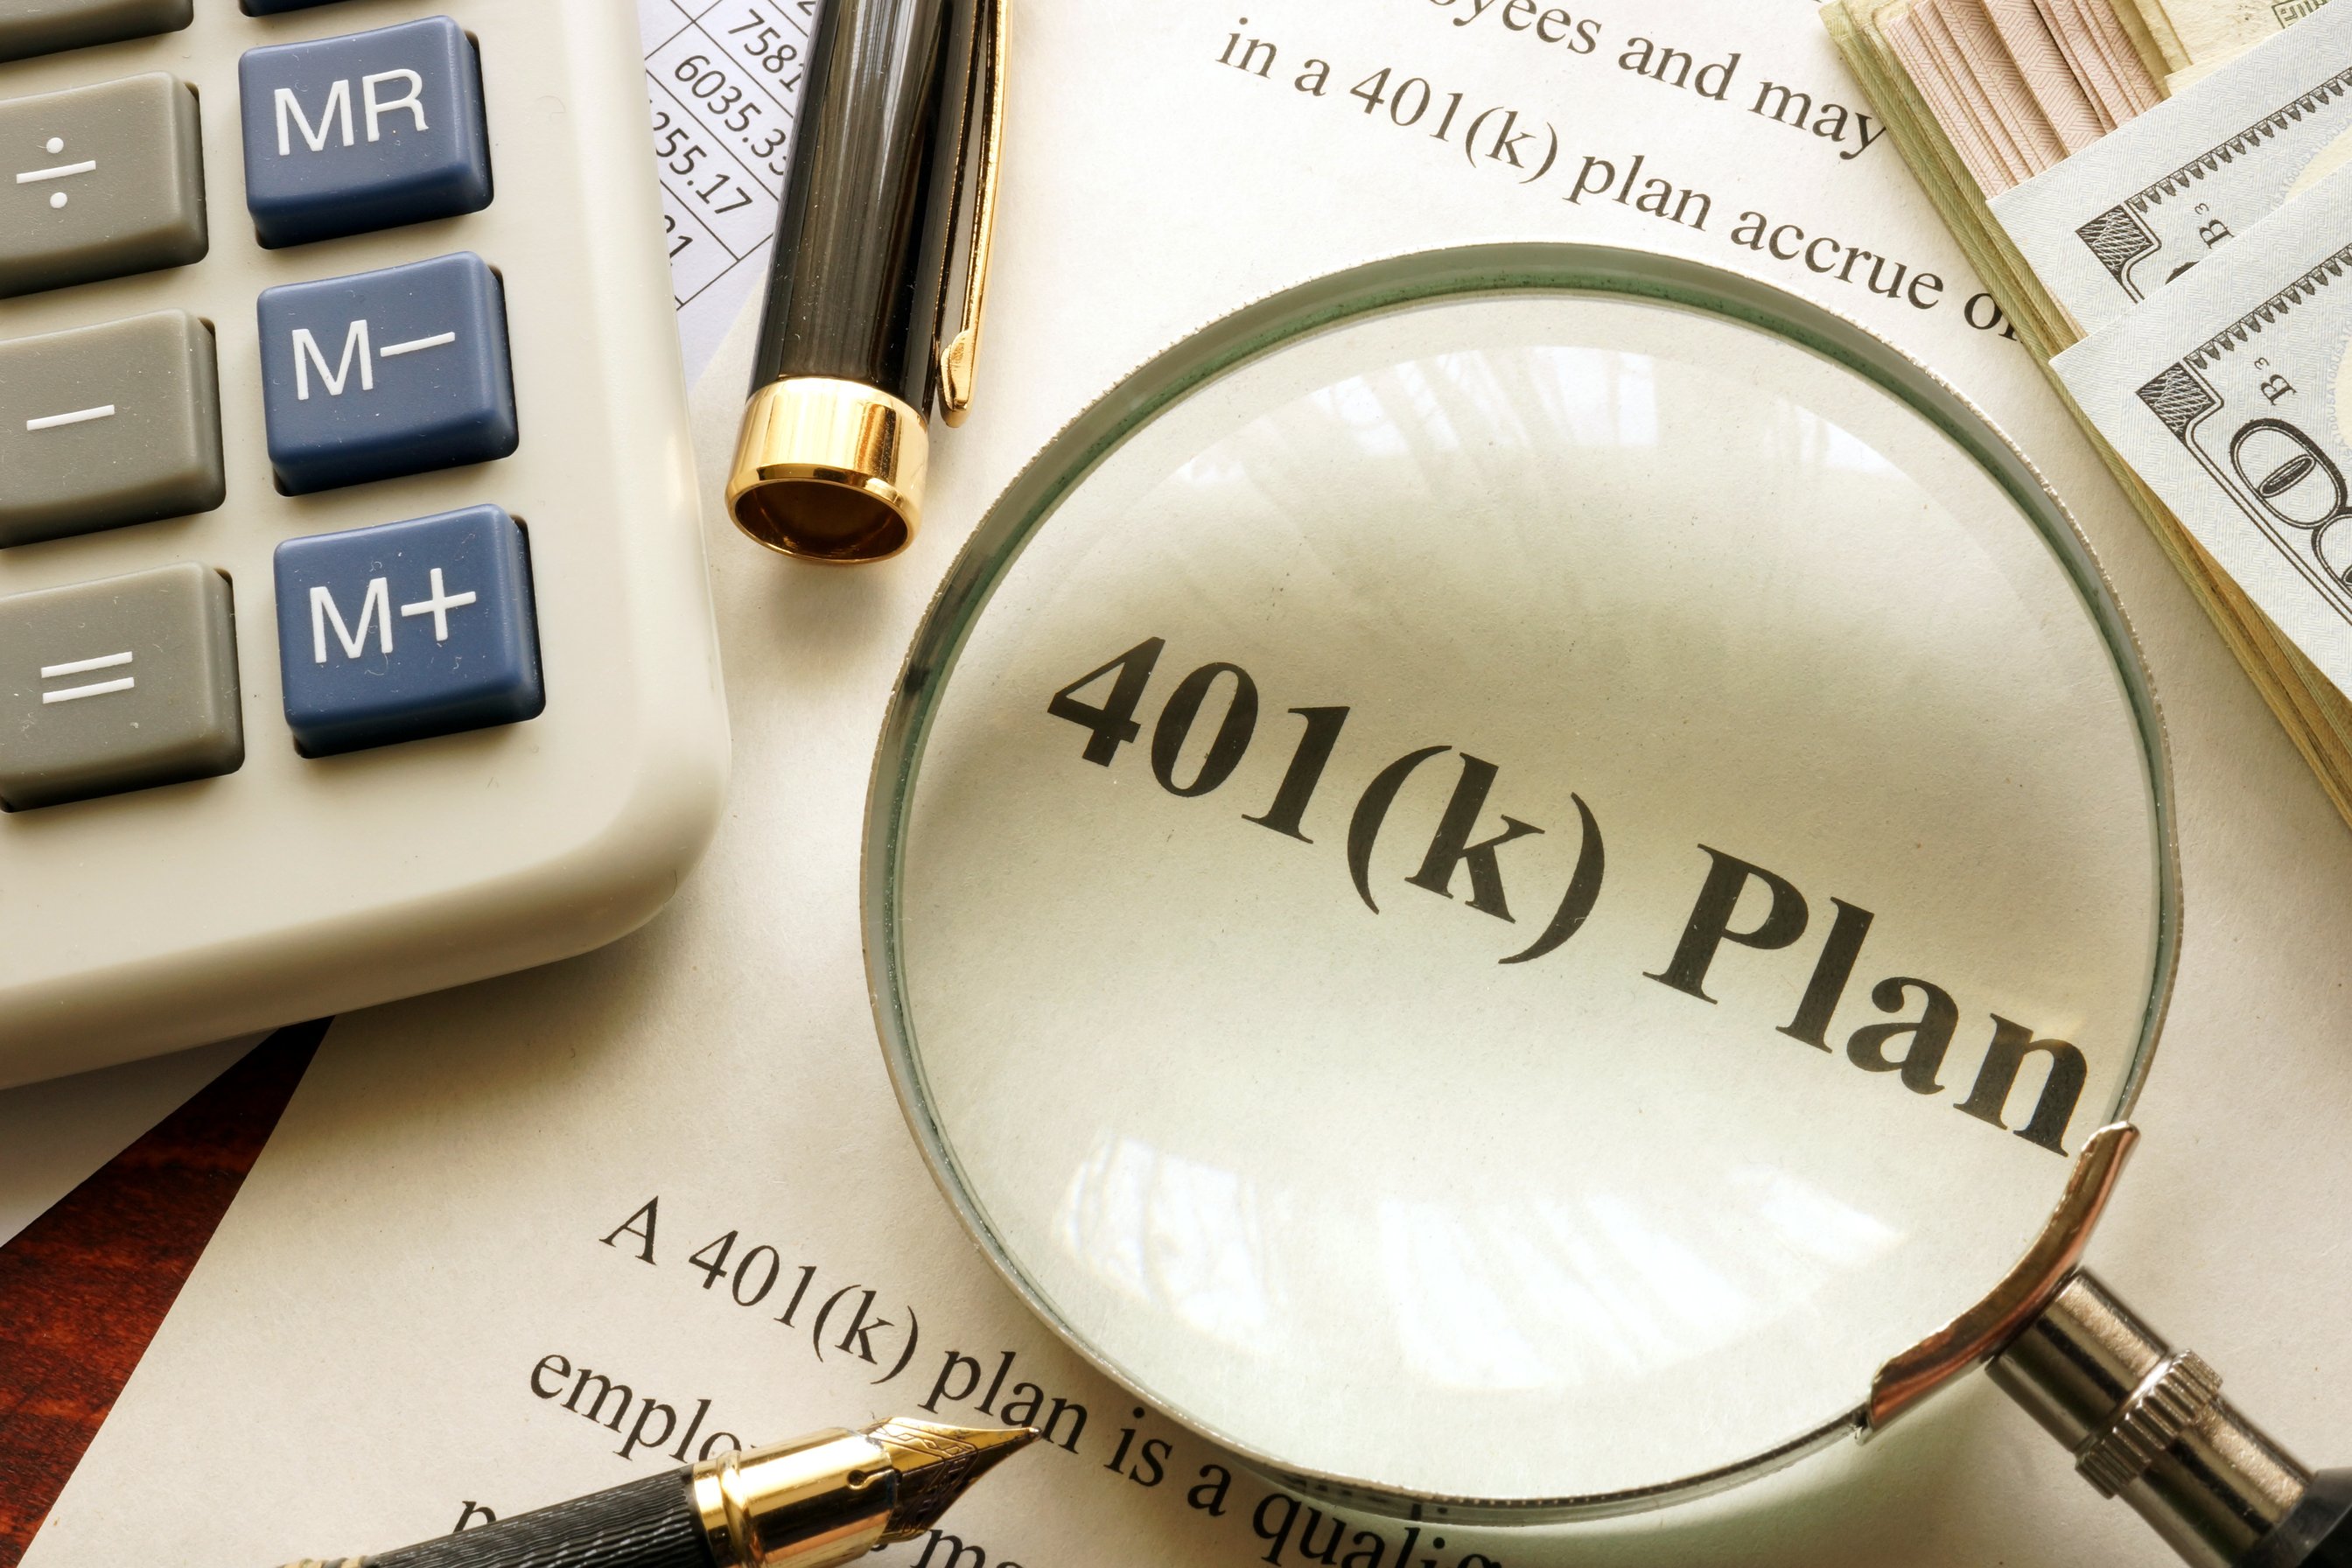 MONEY HACKS: Review your 401(k) / 403(b) Year-End Notices before 2019